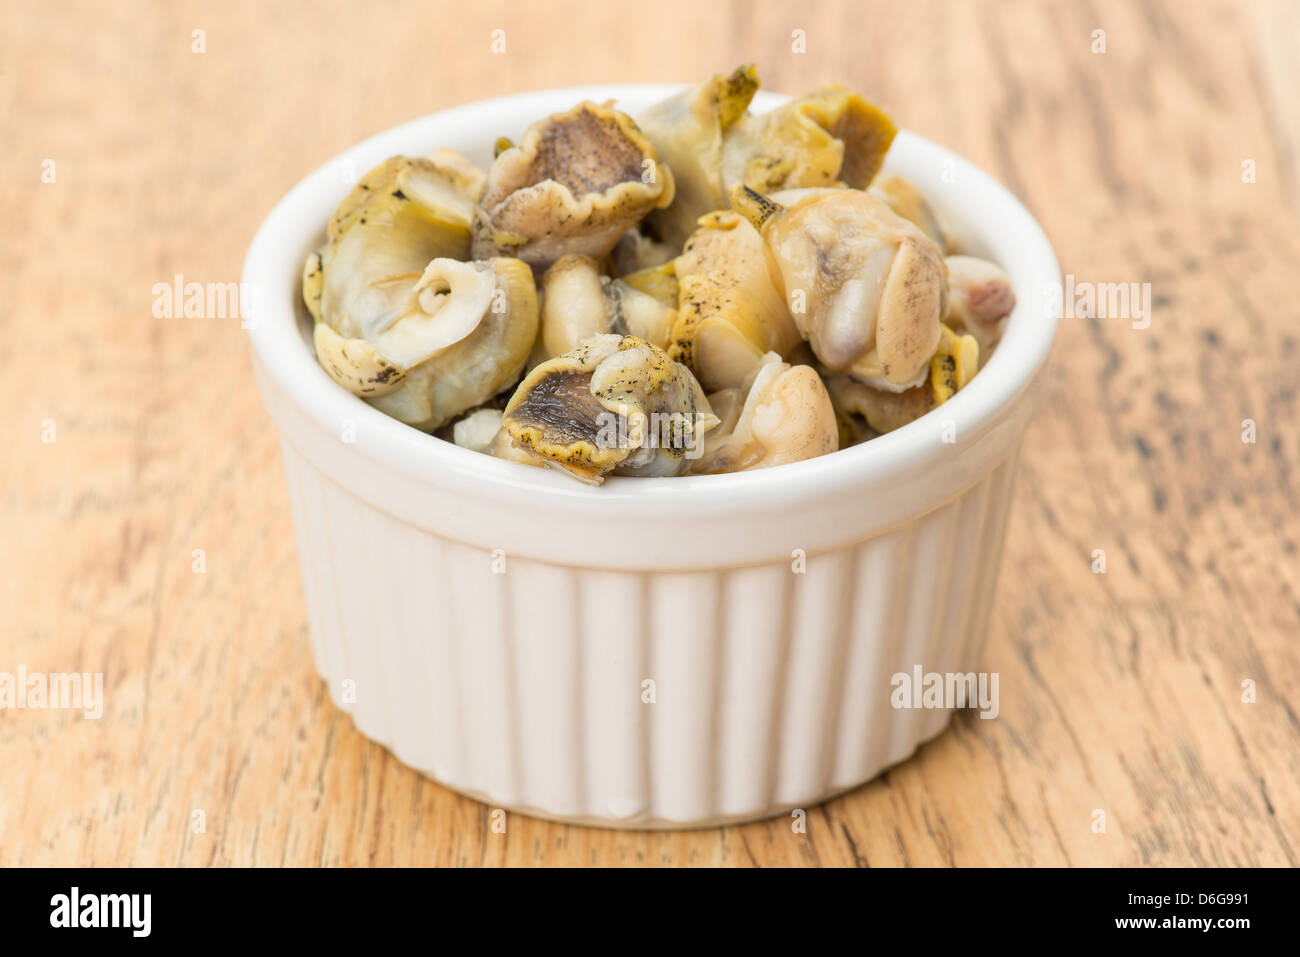 A portion of fresh whelks that are ready to eat. Stock Photo